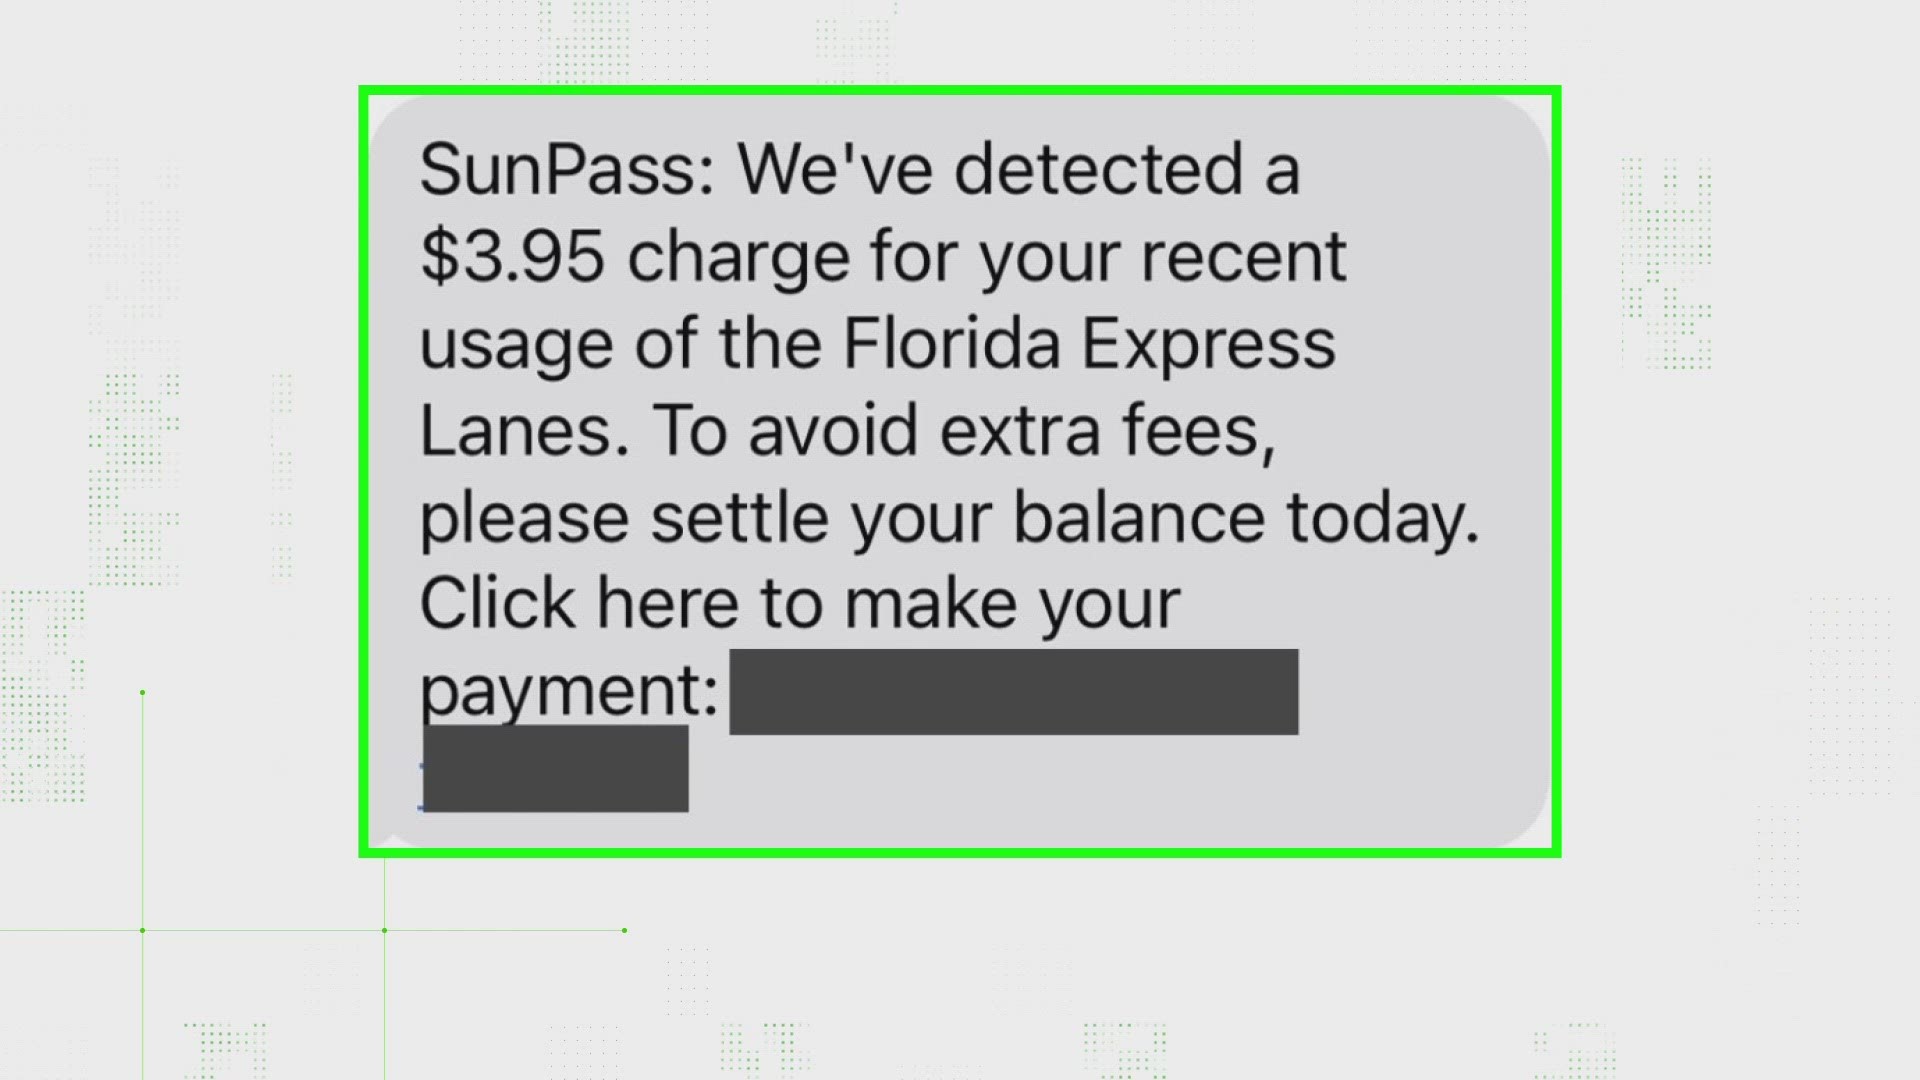 Scammers are impersonating SunPass through text messages with phony links designed to steal your information.